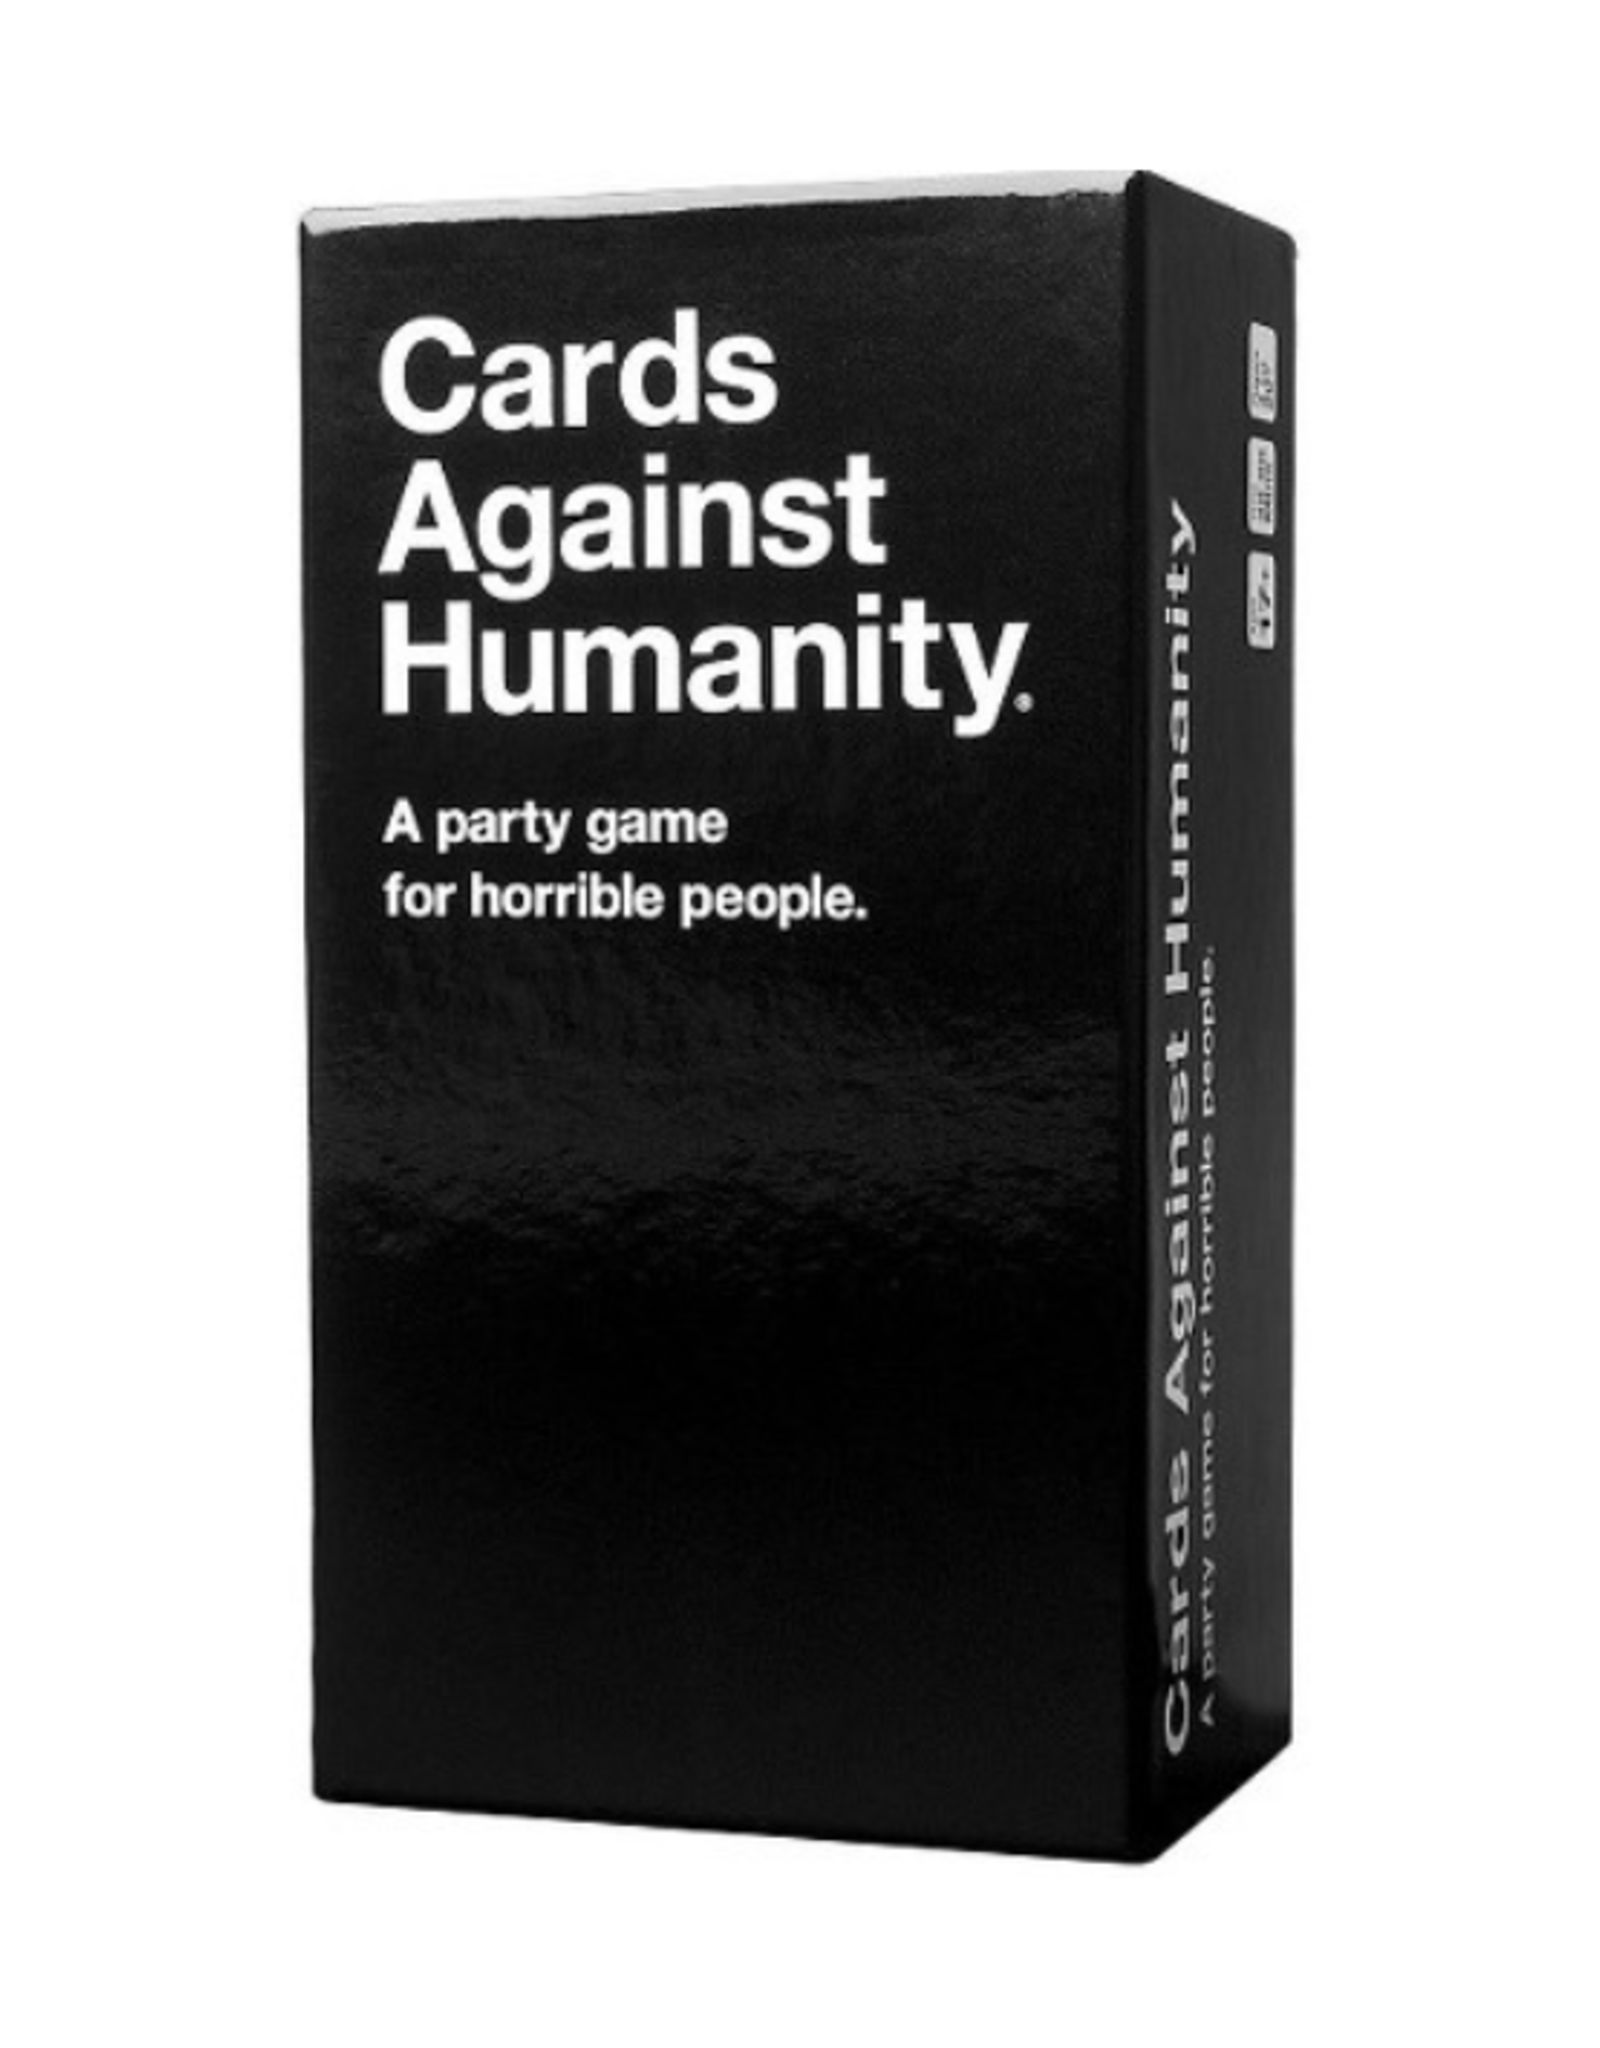 Cards Against Humanity (17+)